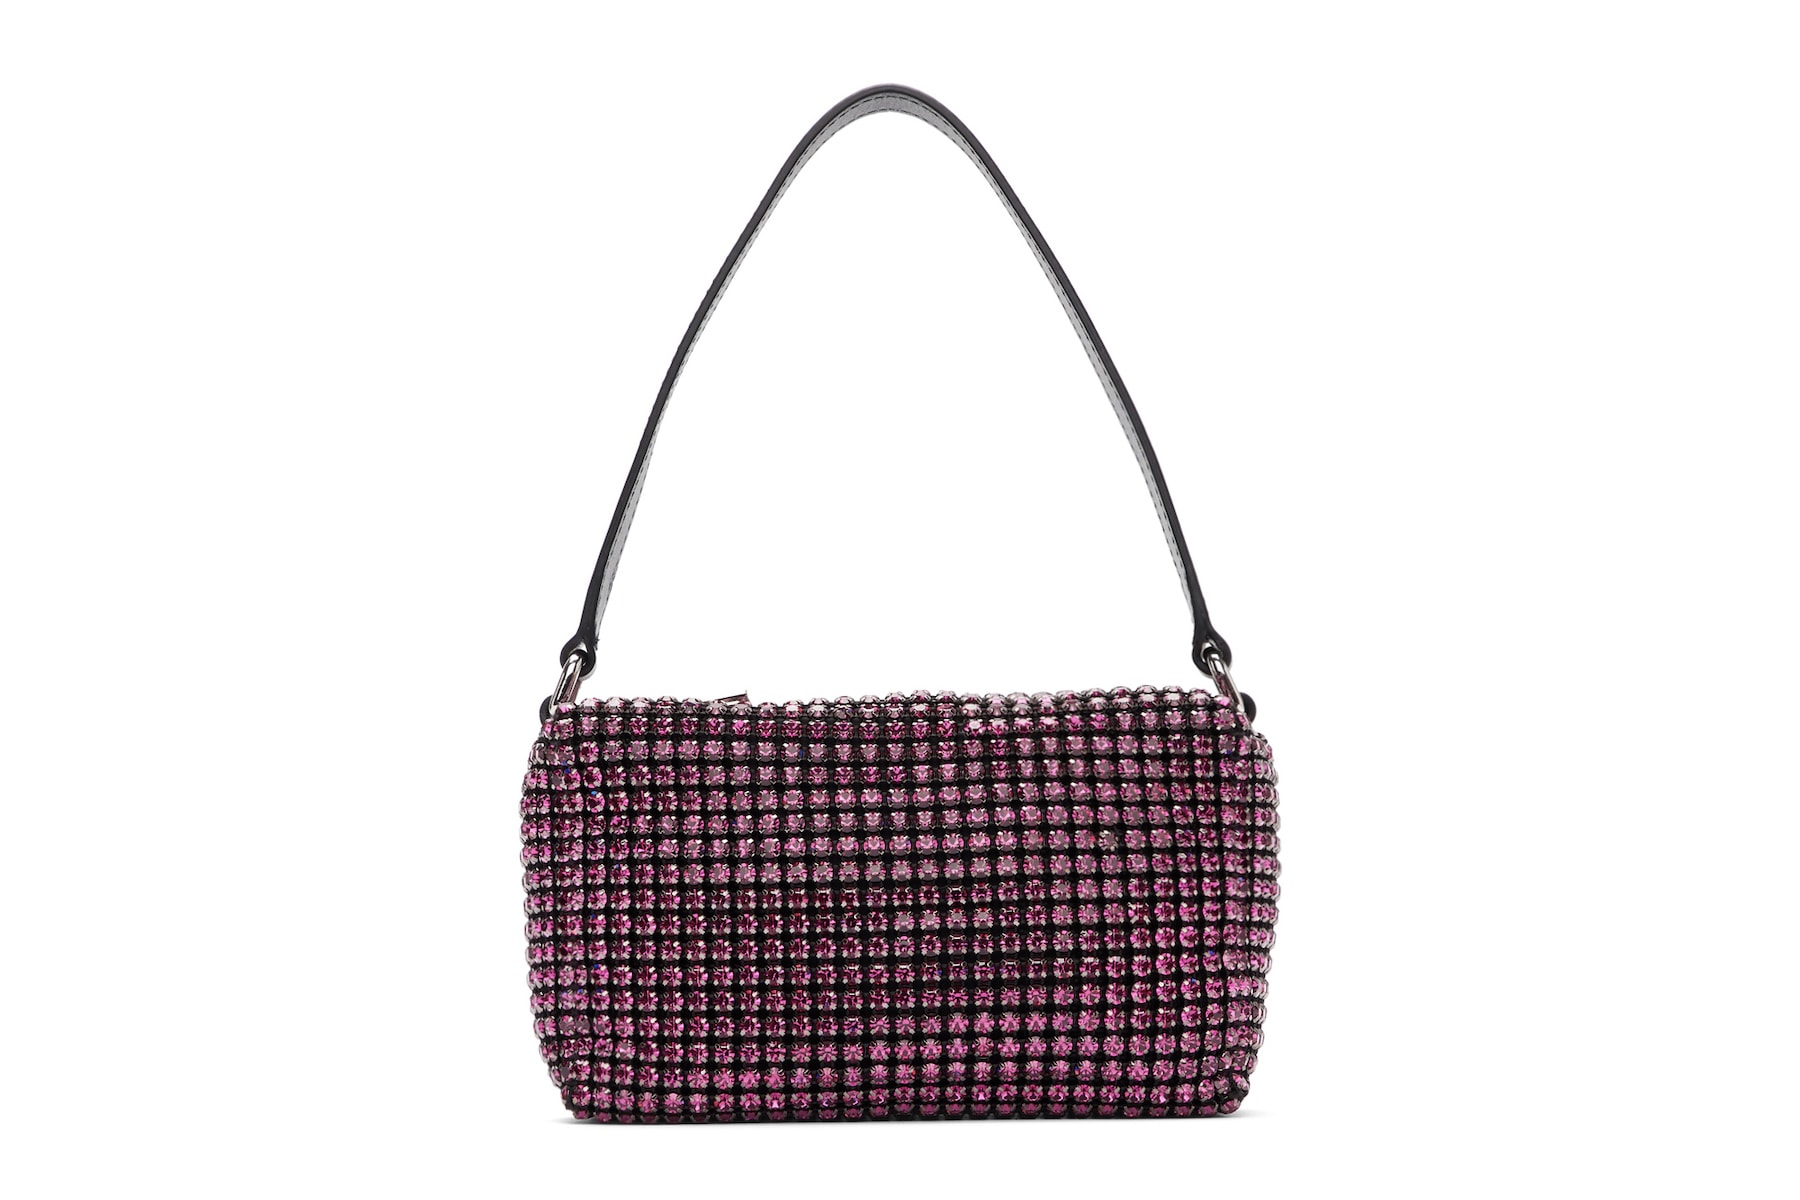 Alexander Wang Pink Rhinestone Glitter Bag Purse Pouch Accessory Bling 90s Inspired Fashion